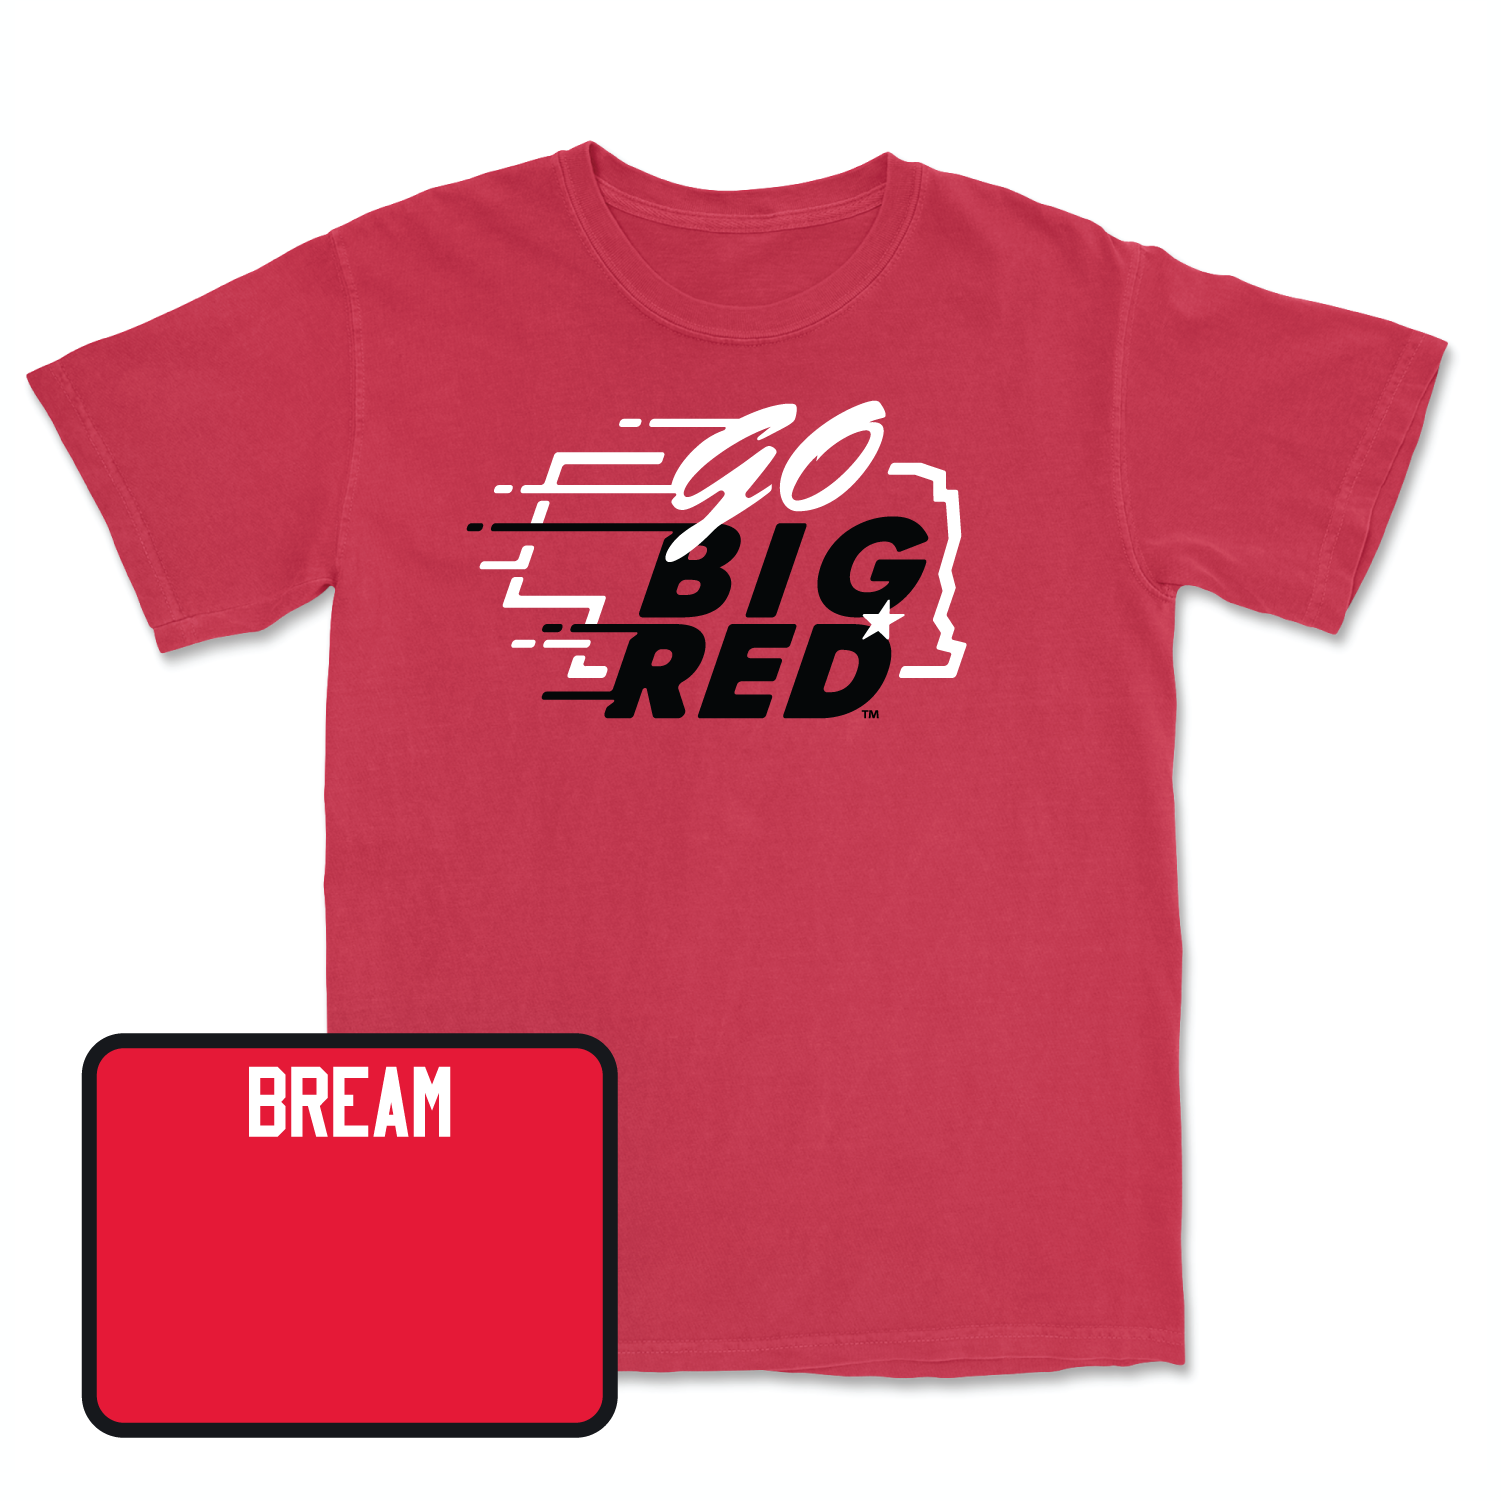 Red Women's Golf GBR Tee Youth Large / Brooke Bream